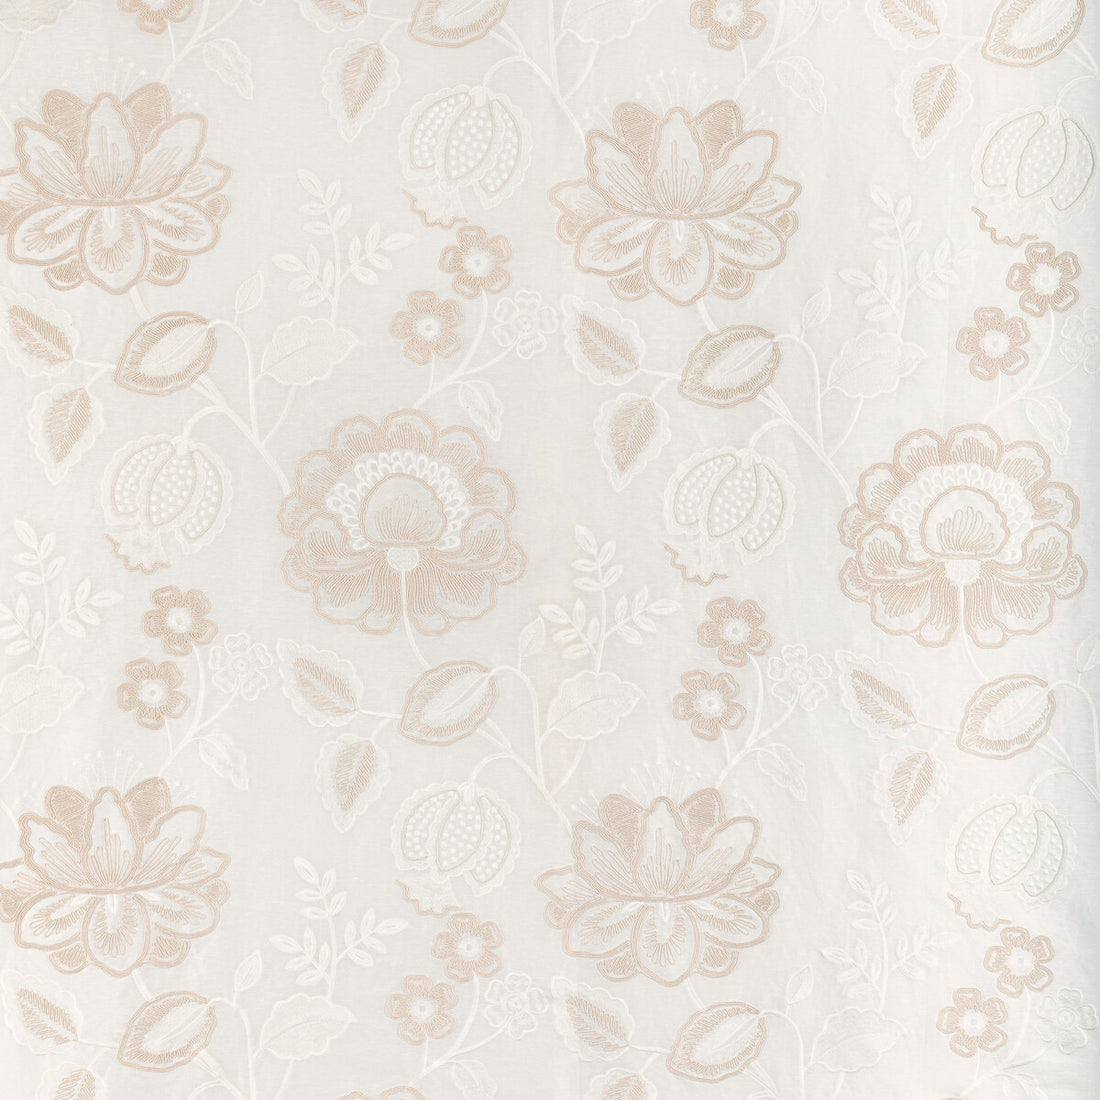 Miramar Sheer fabric in ecru color - pattern 2021124.16.0 - by Lee Jofa in the Summerland collection